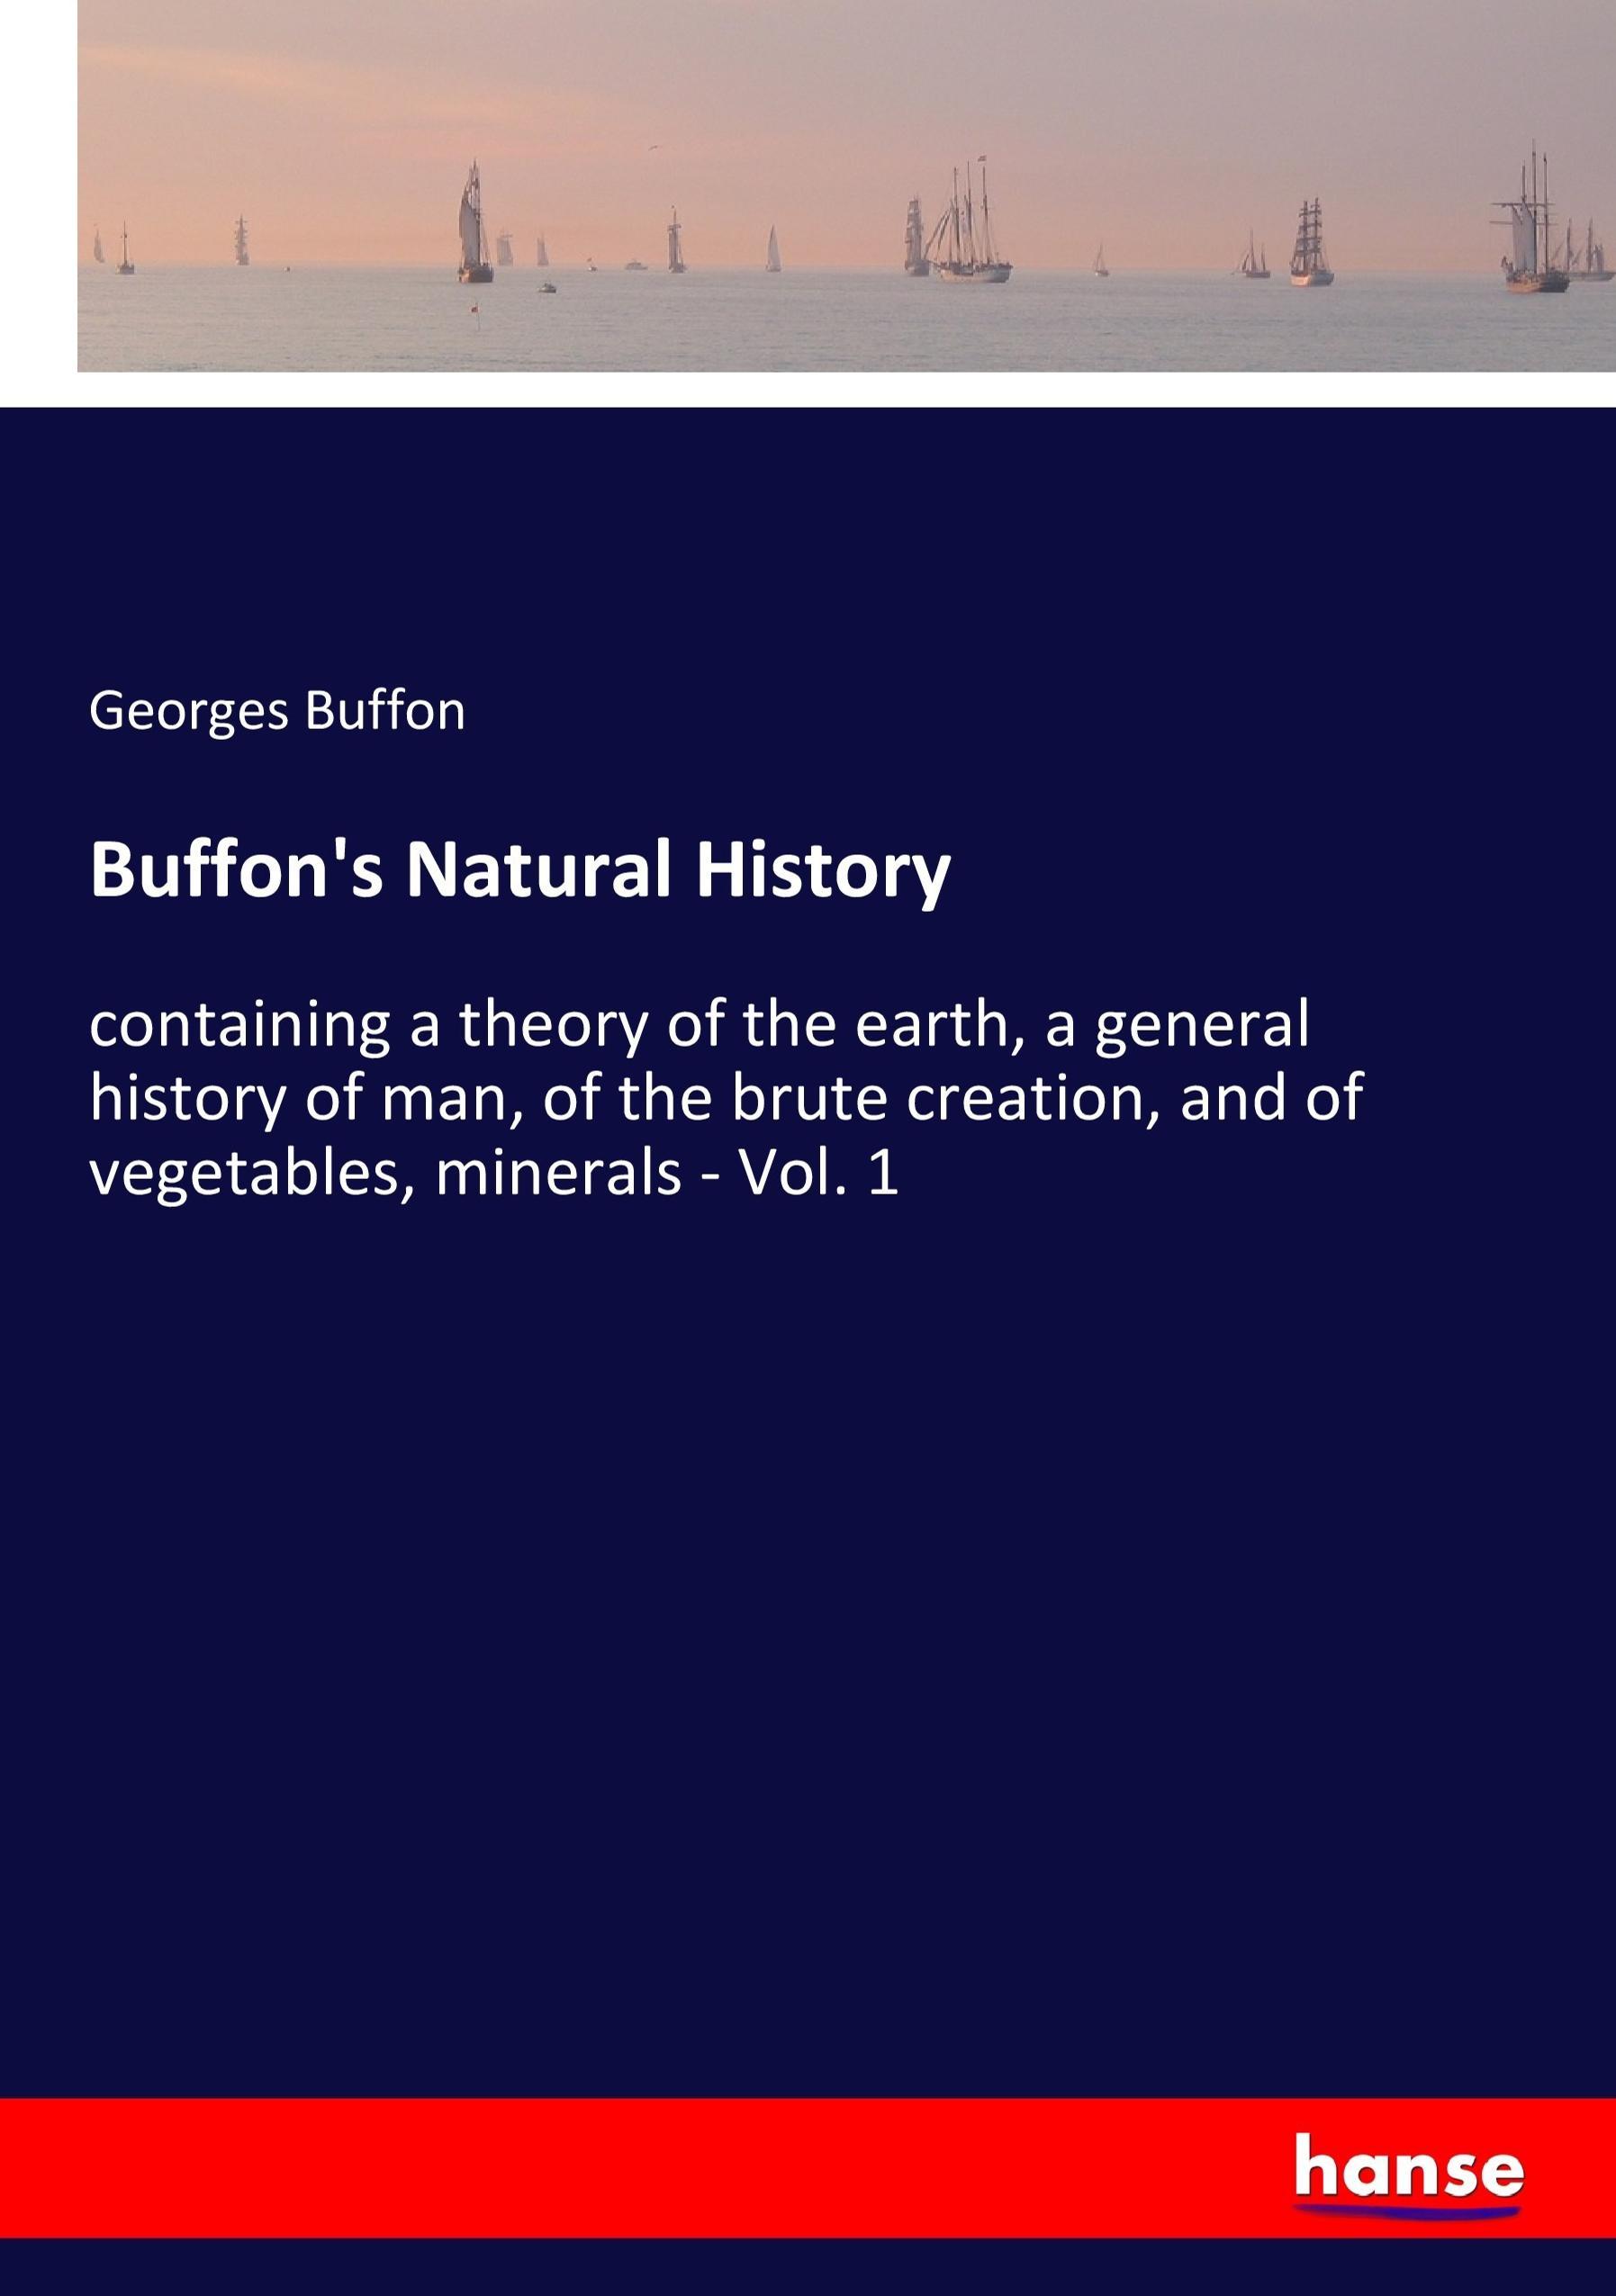 Buffon's Natural History / containing a theory of the earth, a general history of man, of the brute creation, and of vegetables, minerals - Vol. 1 / Georges Buffon / Taschenbuch / Paperback / 348 S. - Buffon, Georges